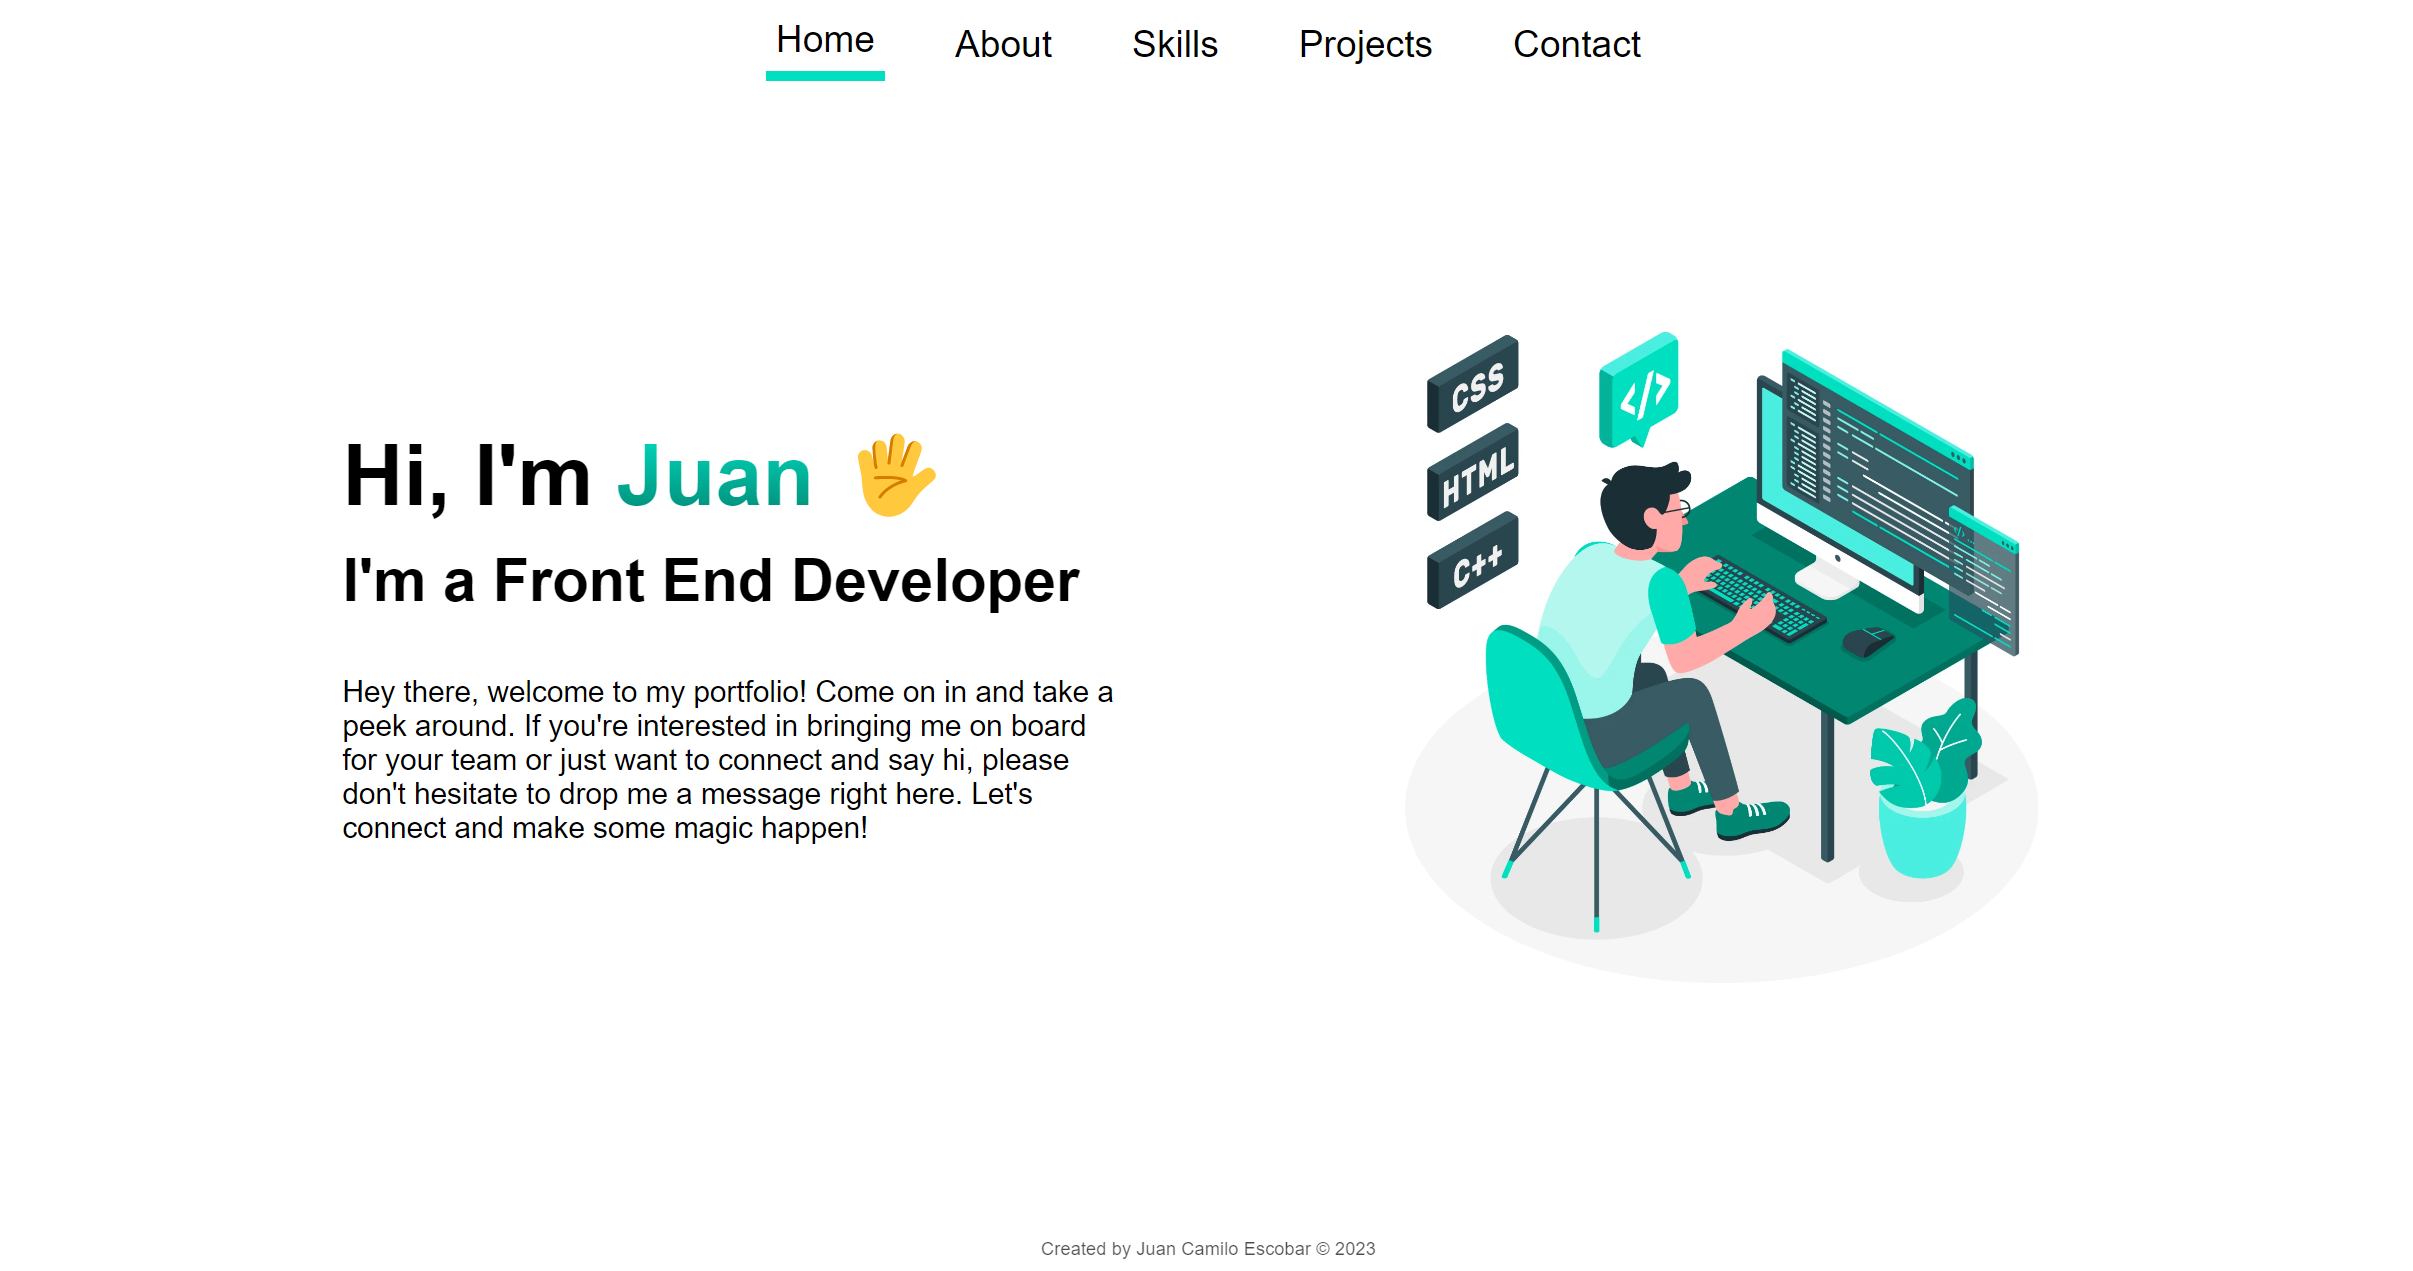 Home About Skills Projects Contact

 

Hi, I'm Juan &
I'm a Front End Developer &

Hey there, welcome to my portfolio! Come on in and take a
peek around. If you're interested in bringing me on board
for your team or just want to connect and say hi, please
don't hesitate to drop me a message right here. Let's
connect and make some magic happen!

 

 

san Camilo Escobar